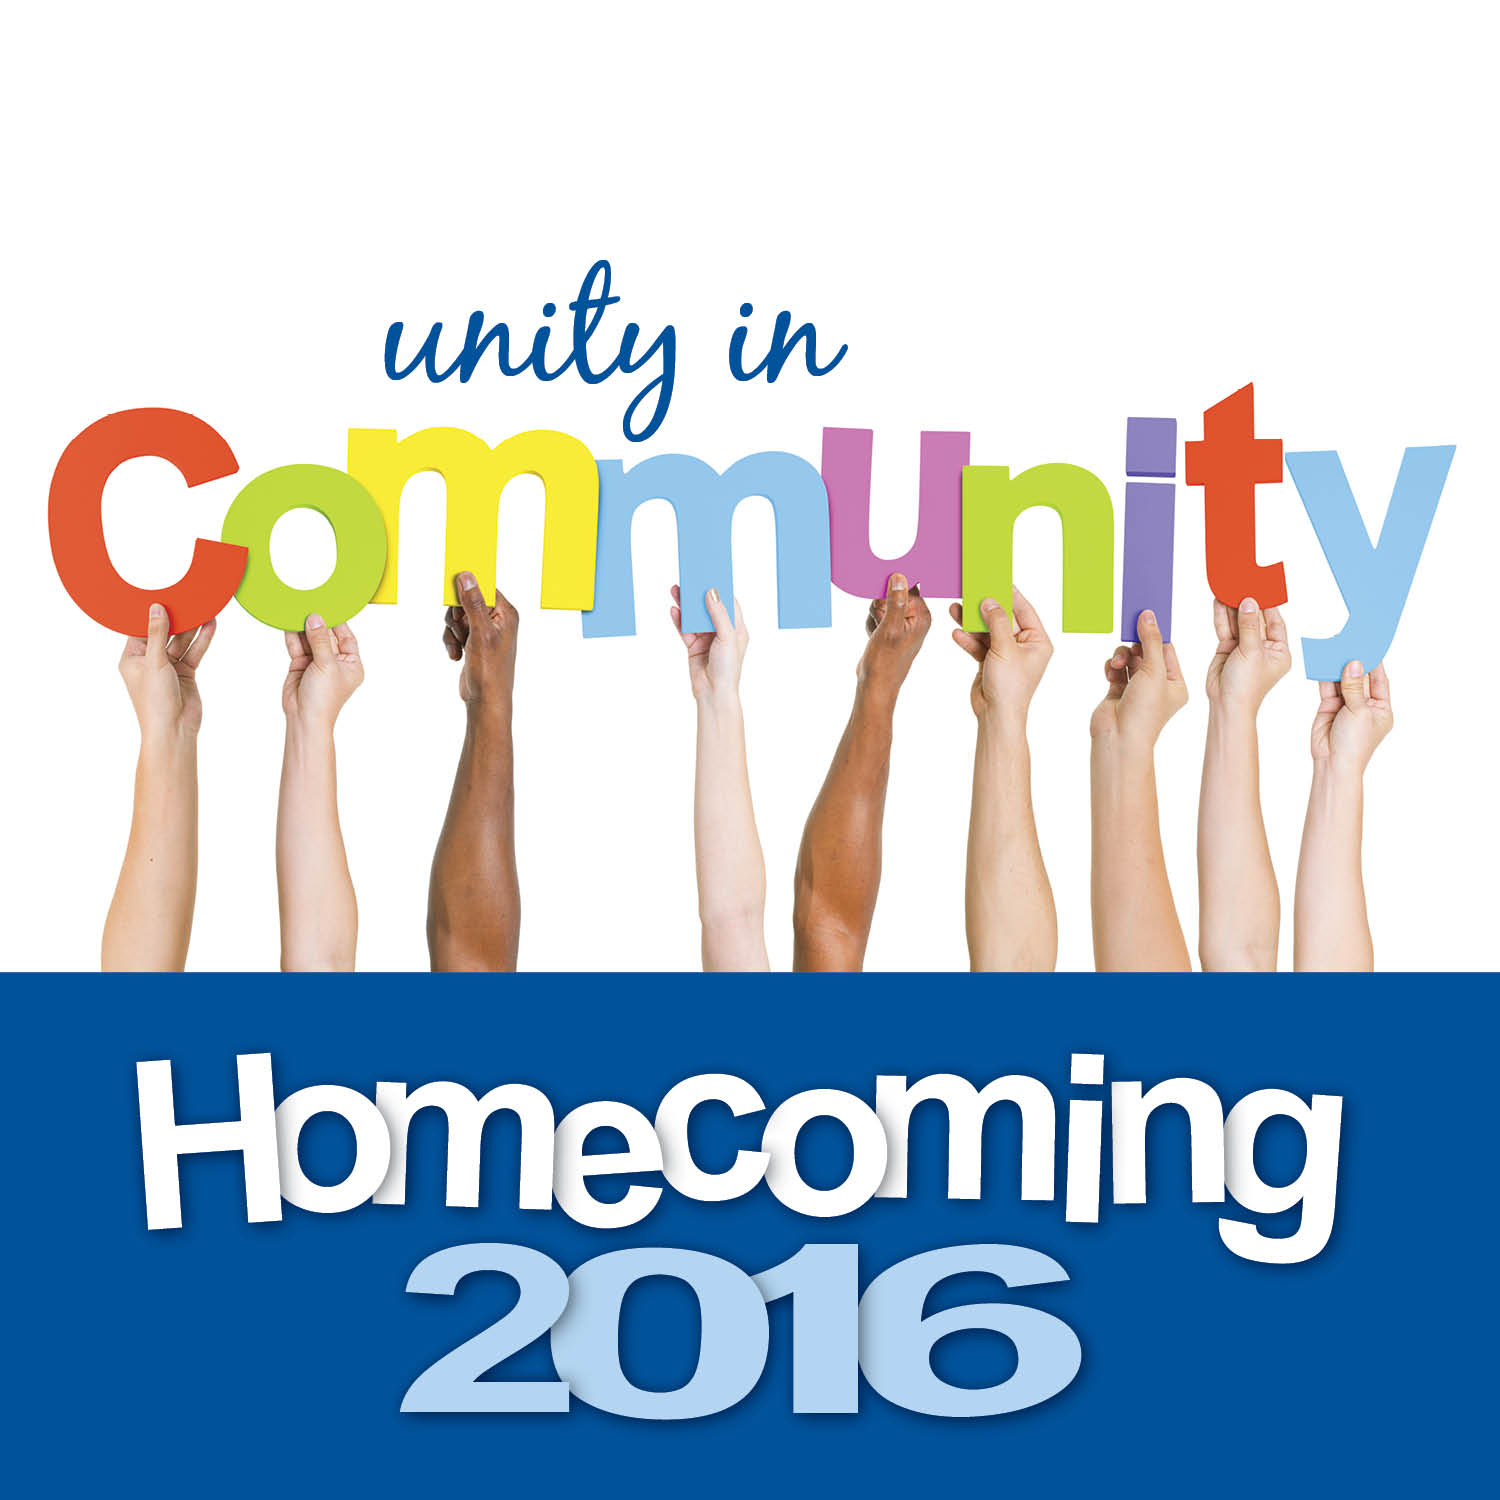 
<span>Homecoming 2016: Sept. 30 from 11 am to 6 pm</span>
